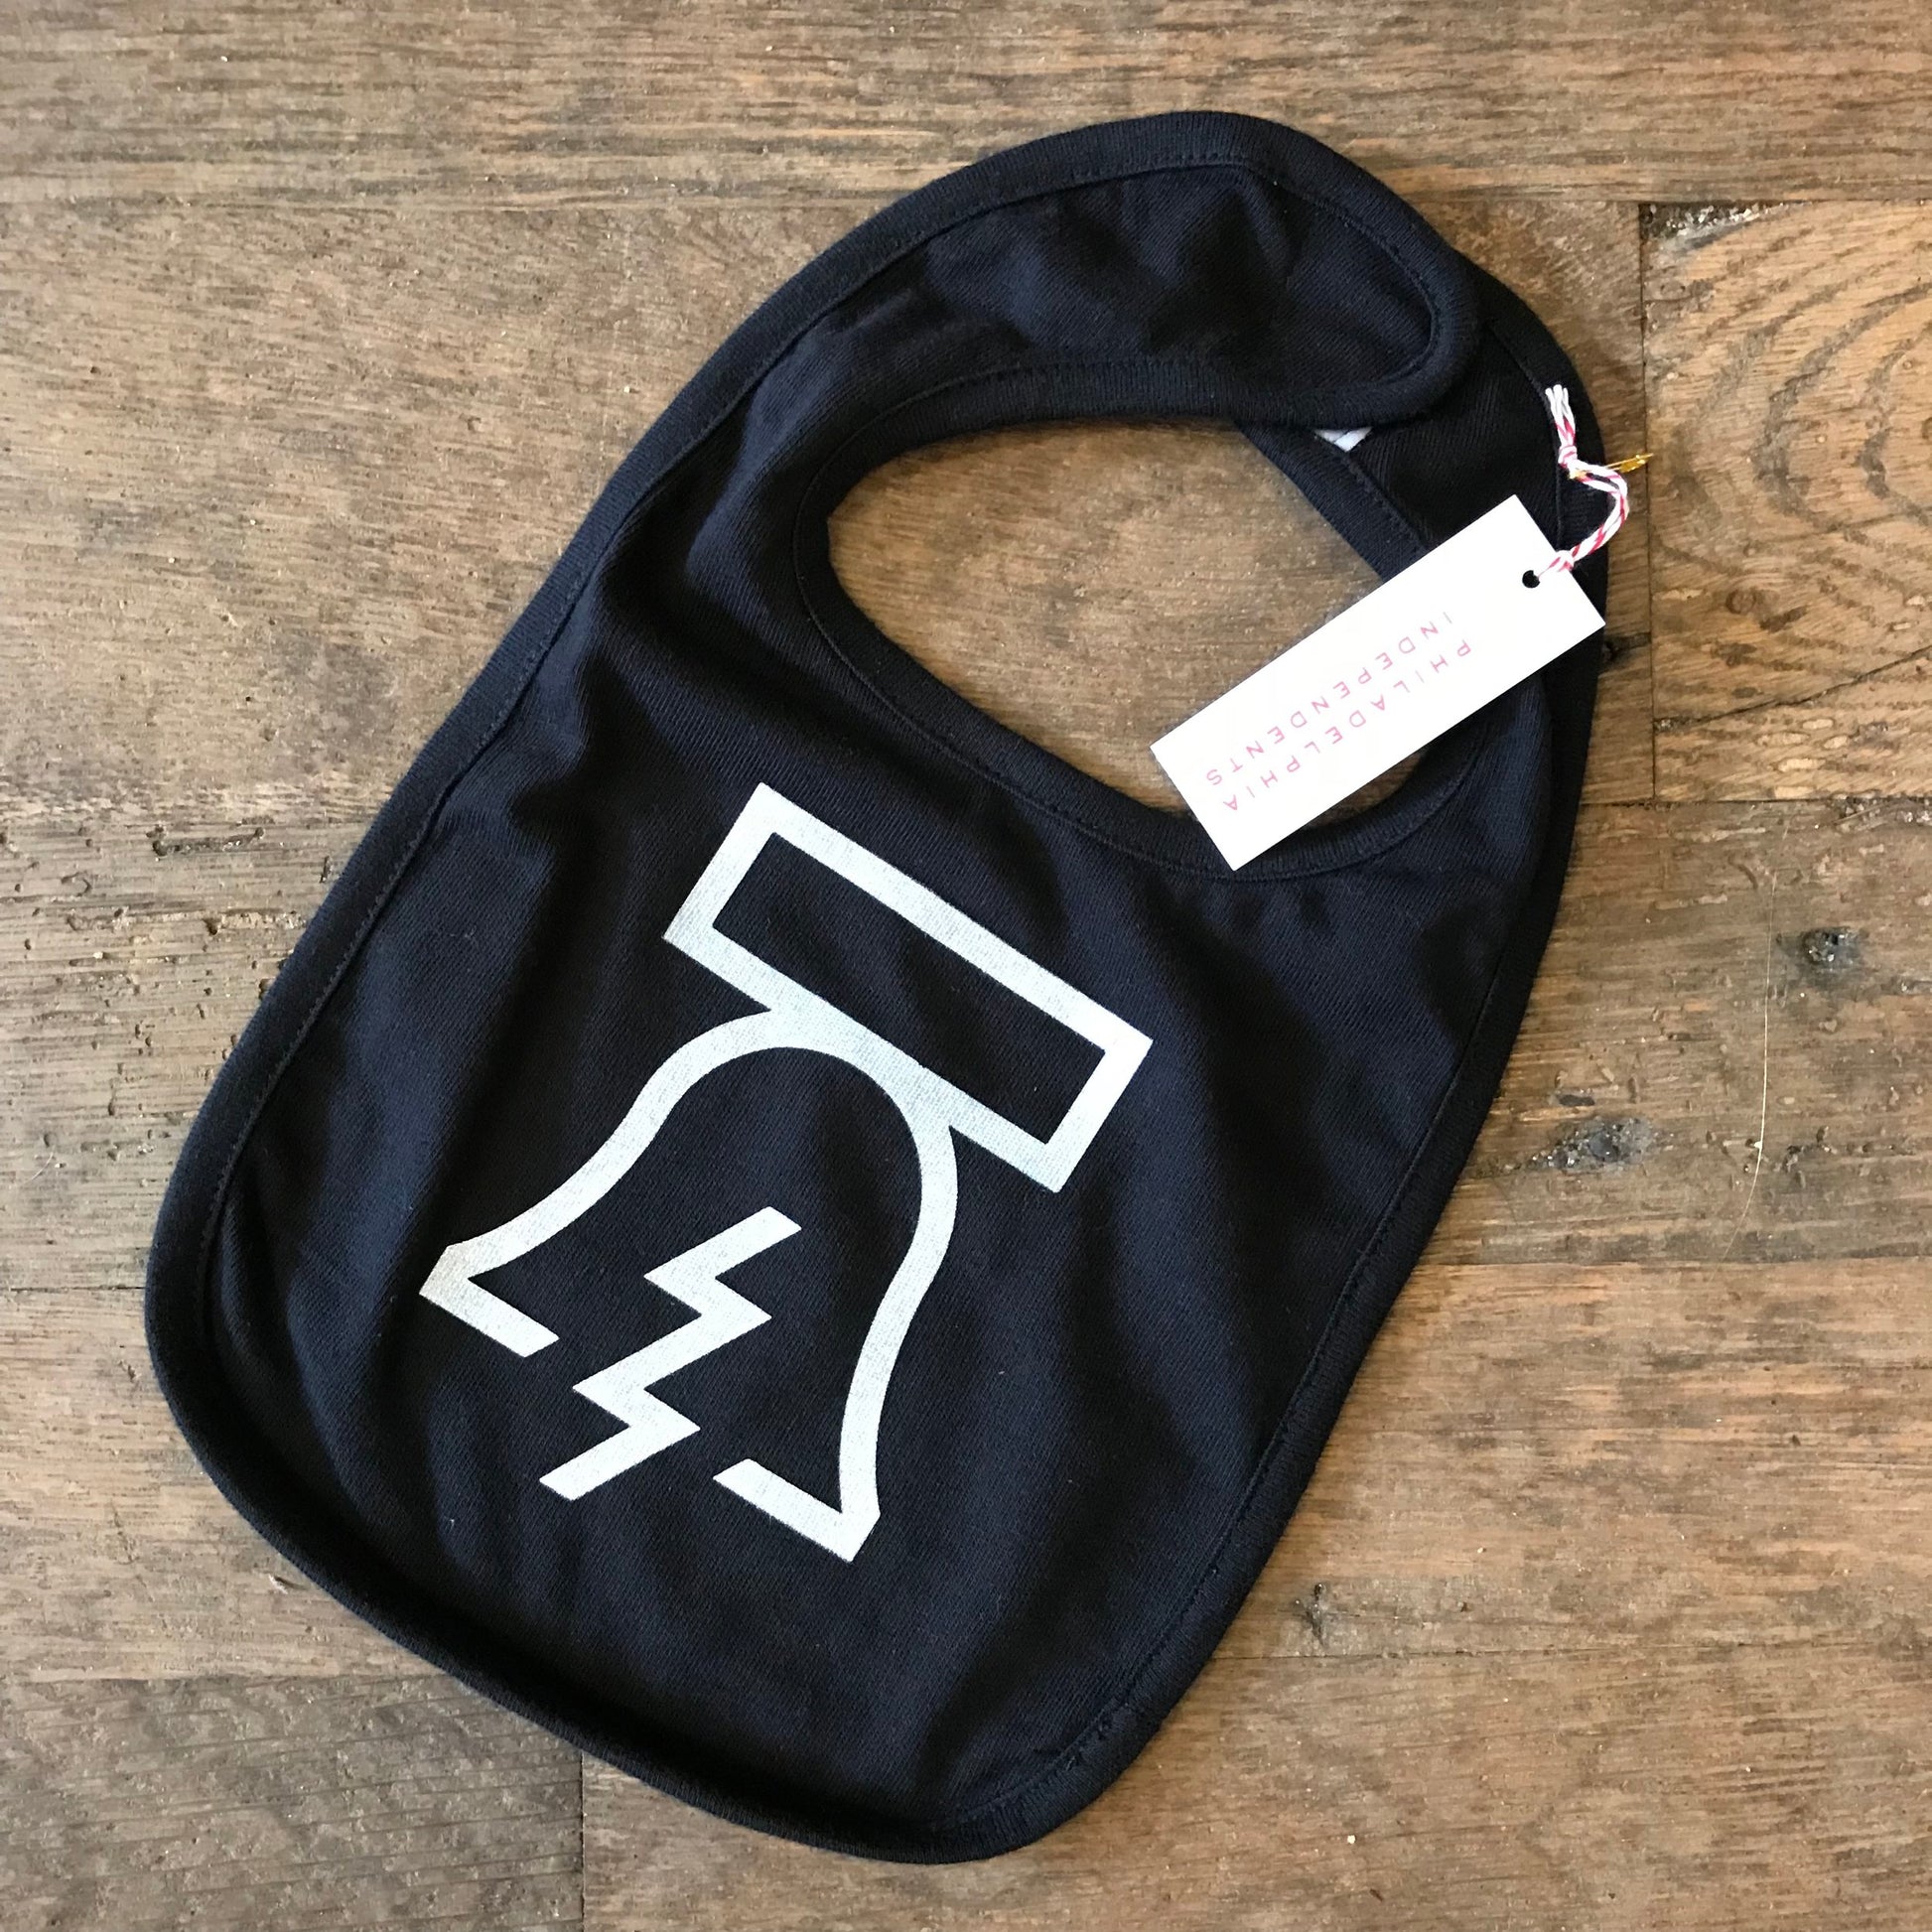 A Bell & Bolt Baby Bib in black cotton with a white outline of a superhero cape design and a tag attached to it by Philadelphia Independents.